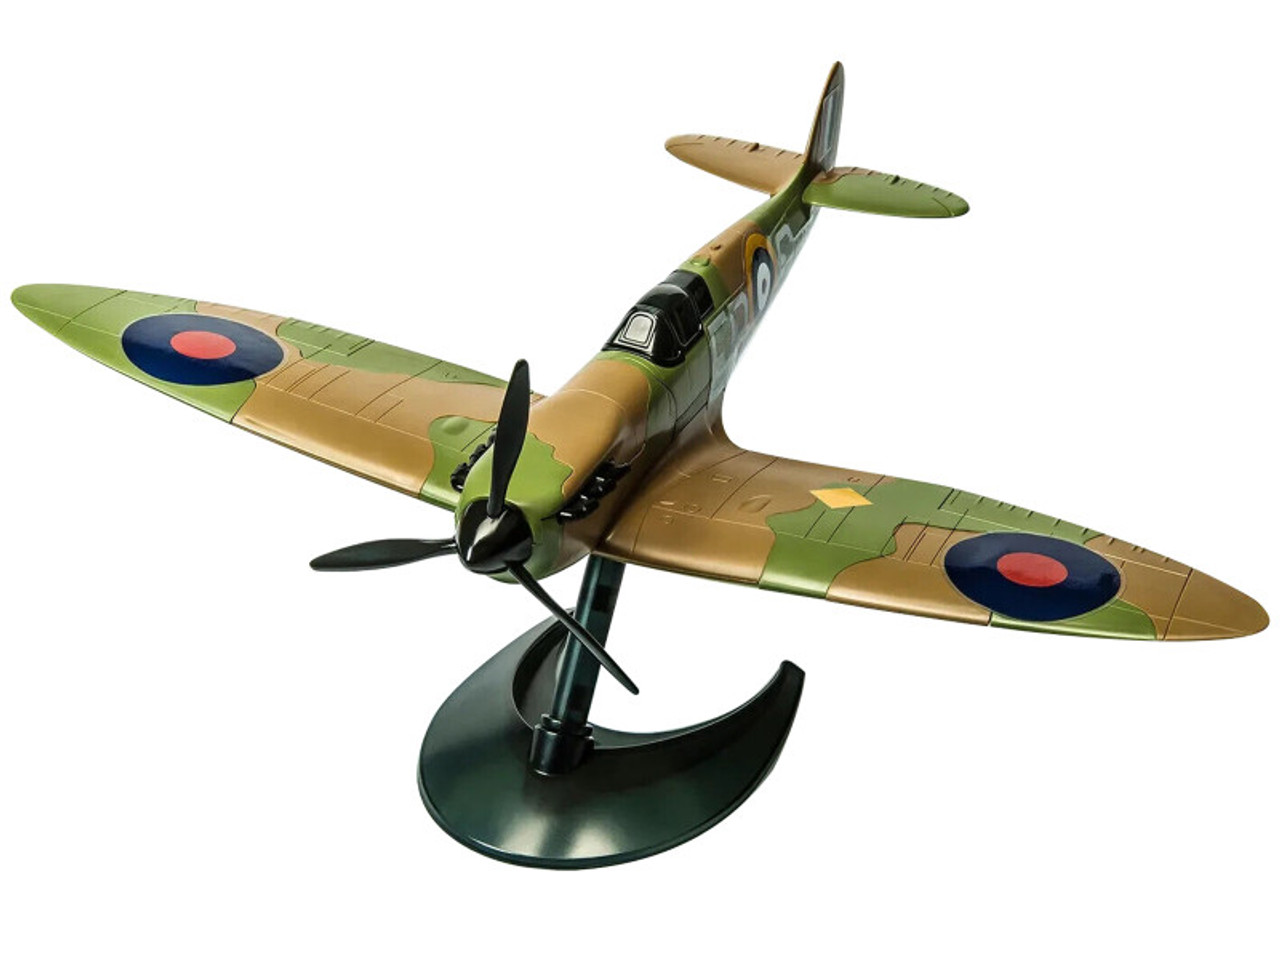 Skill 1 Model Kit Spitfire Snap Together Painted Plastic Model Airplane Kit by Airfix Quickbuild